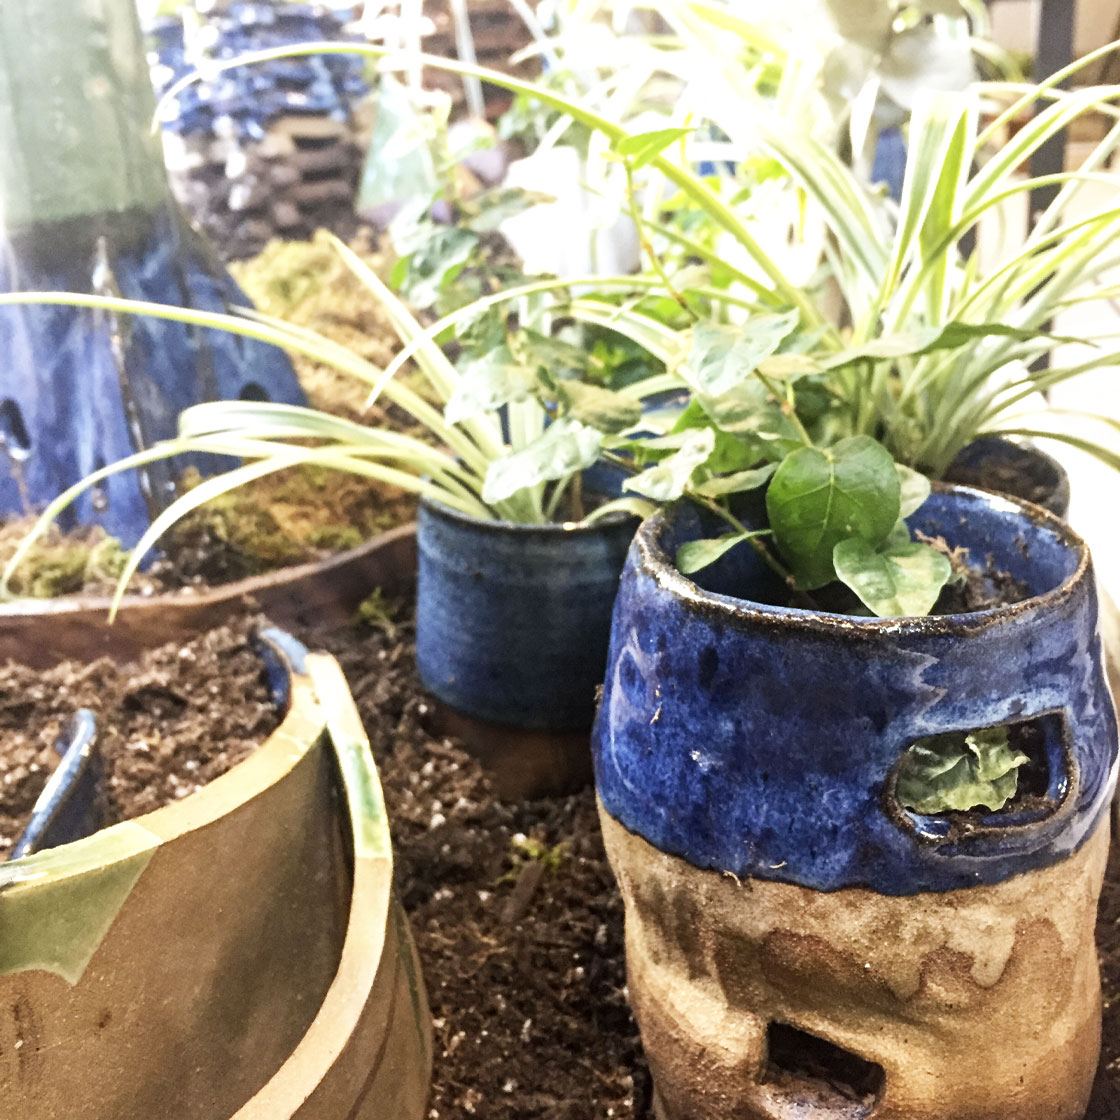 Several handcrafted ceramic pots with plants